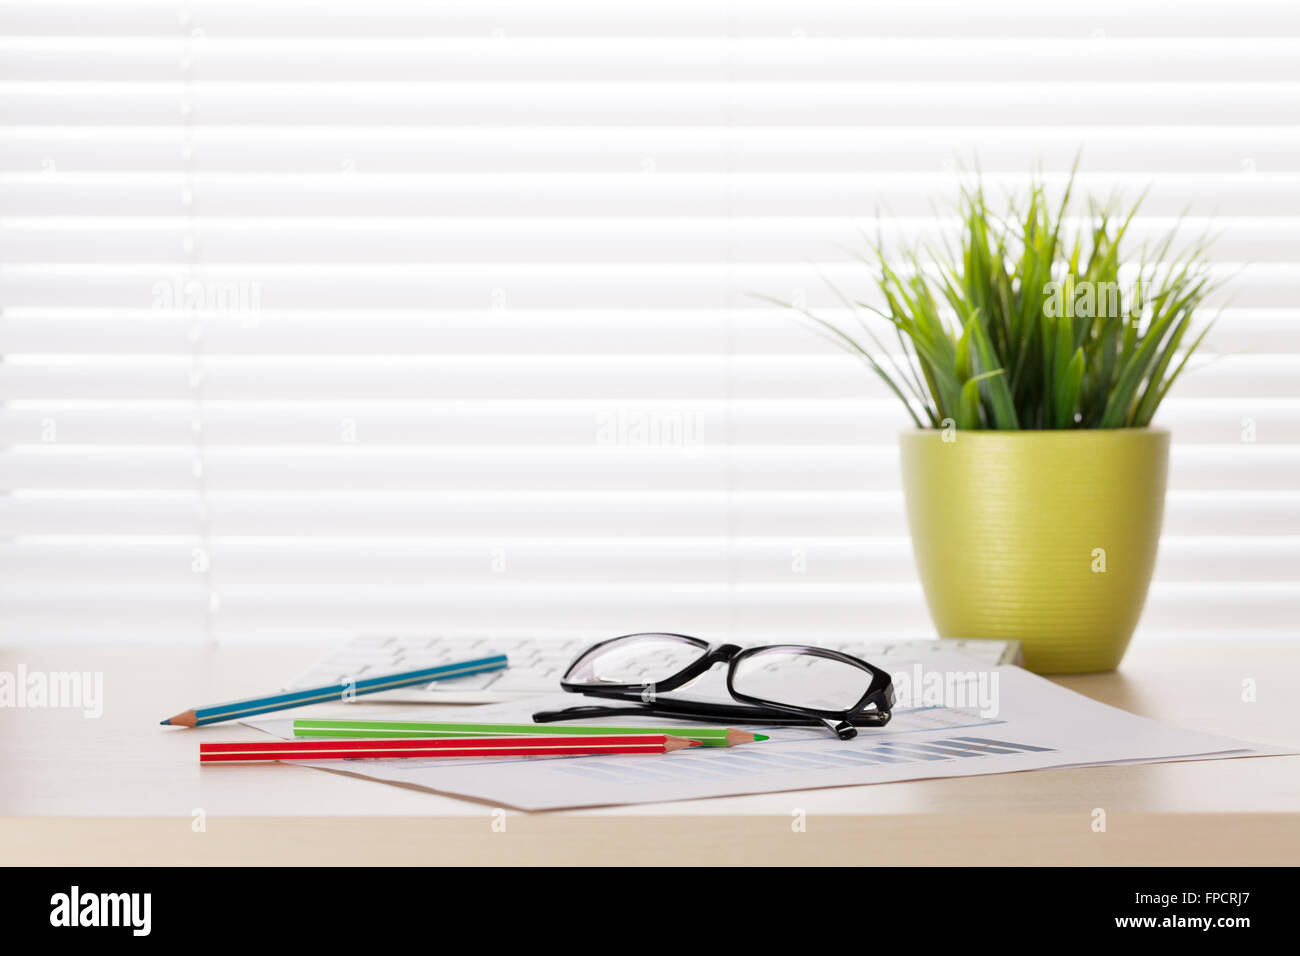 Office workplace with supplies and plant on wood desk table in front of window with blinds Stock Photo